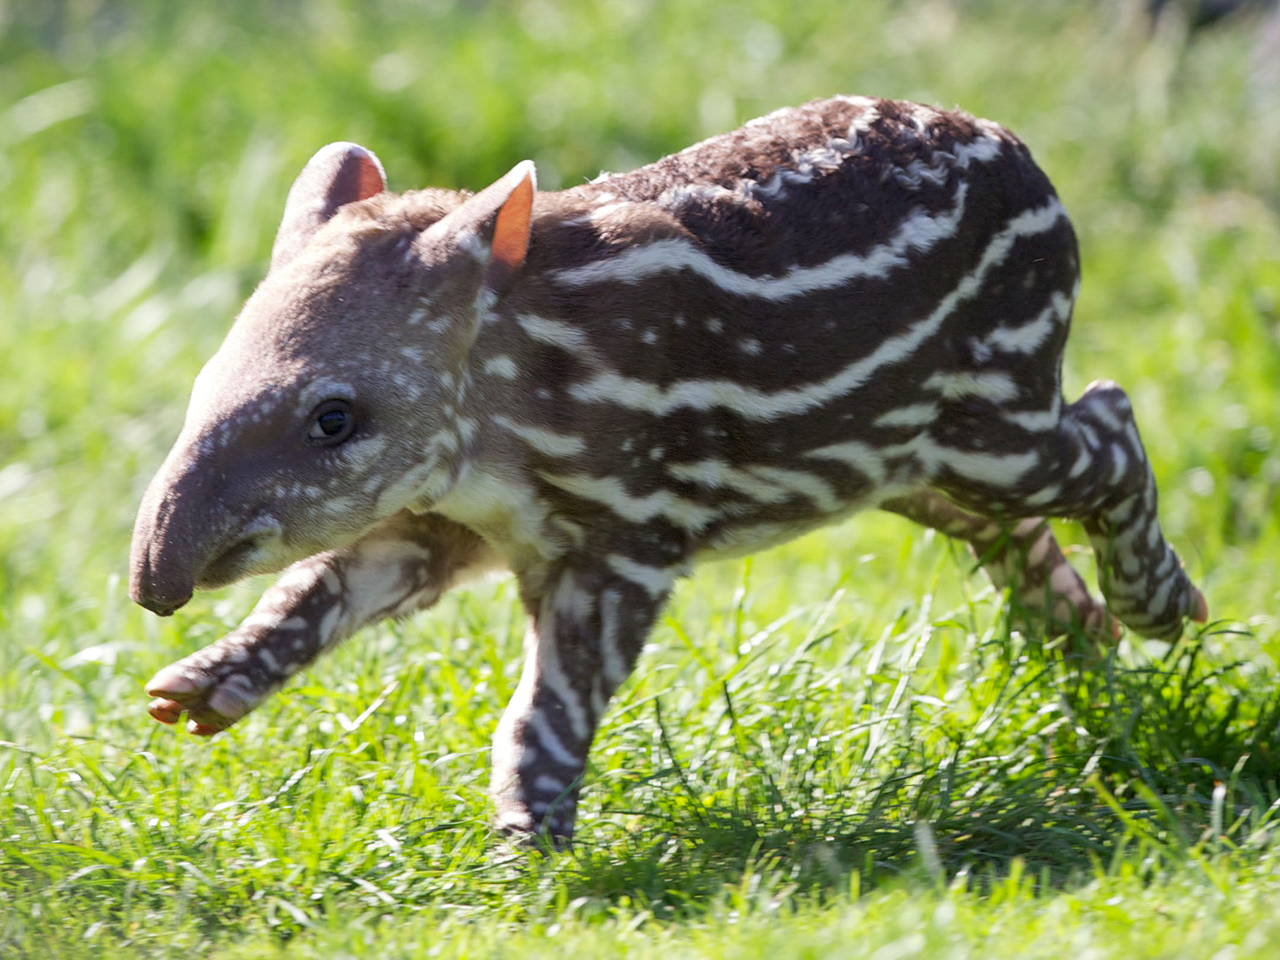 Spotted! Dublin Zoo welcomes adorable baby tapir